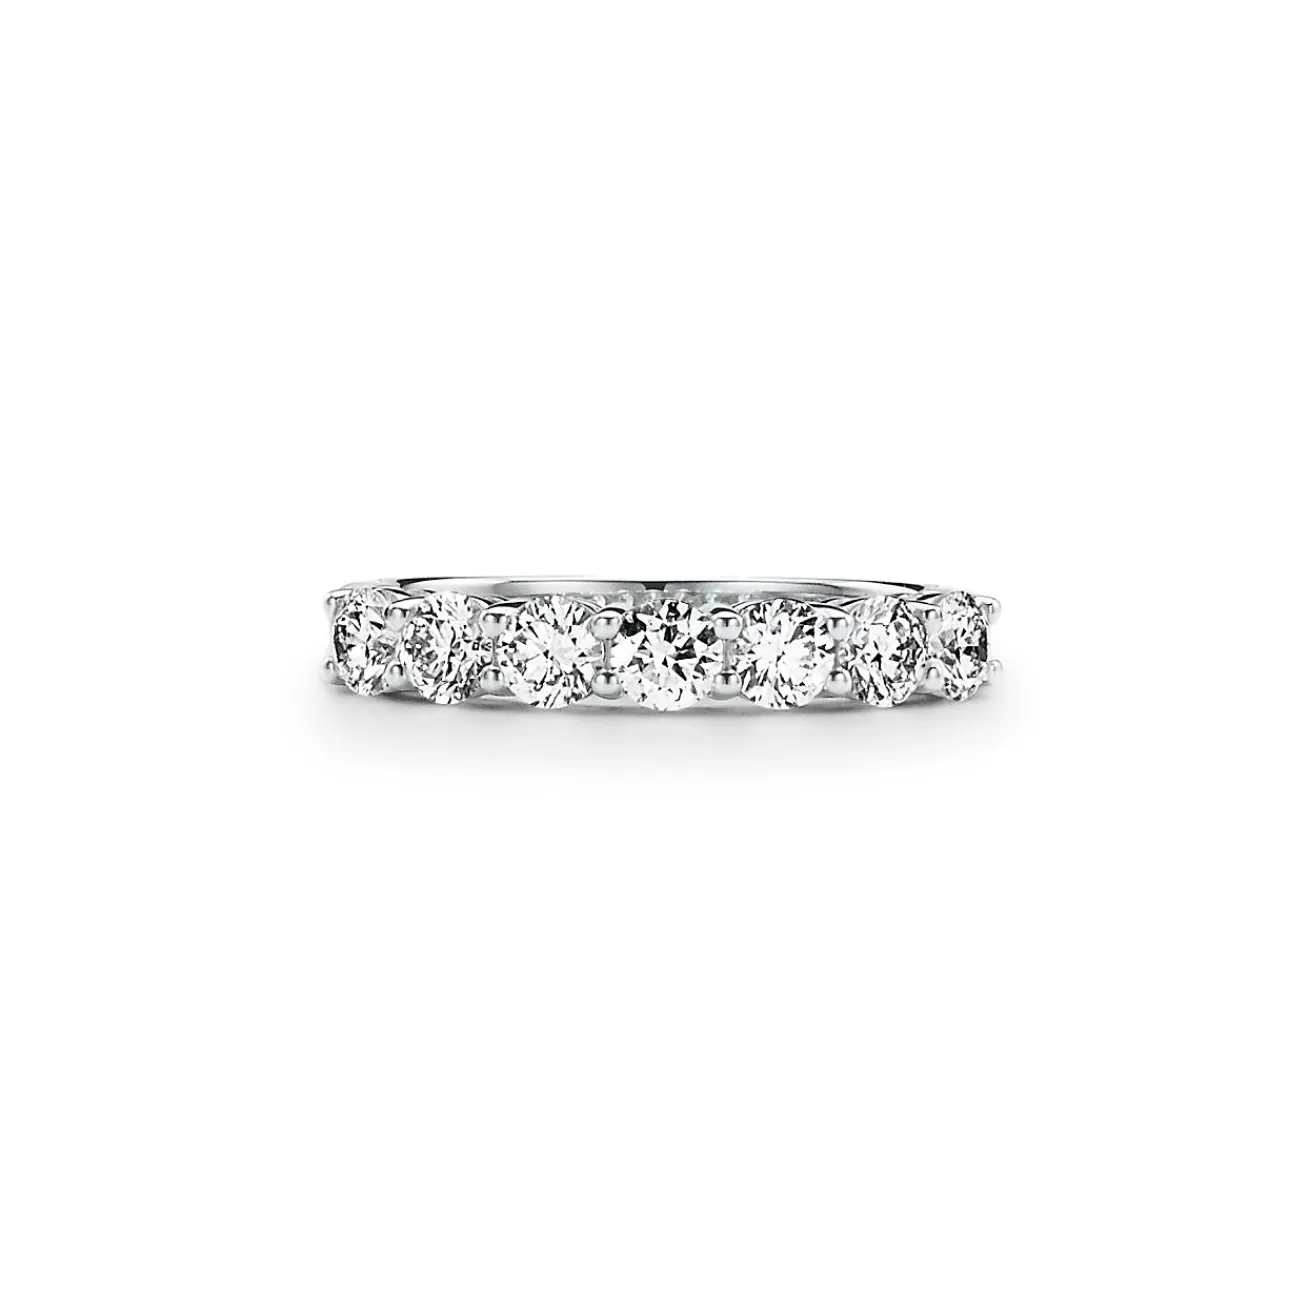 Tiffany & Co. Tiffany Forever Band Ring in Platinum with a Half-circle of Diamonds, 3.5 mm | ^Women Rings | Stacking Rings